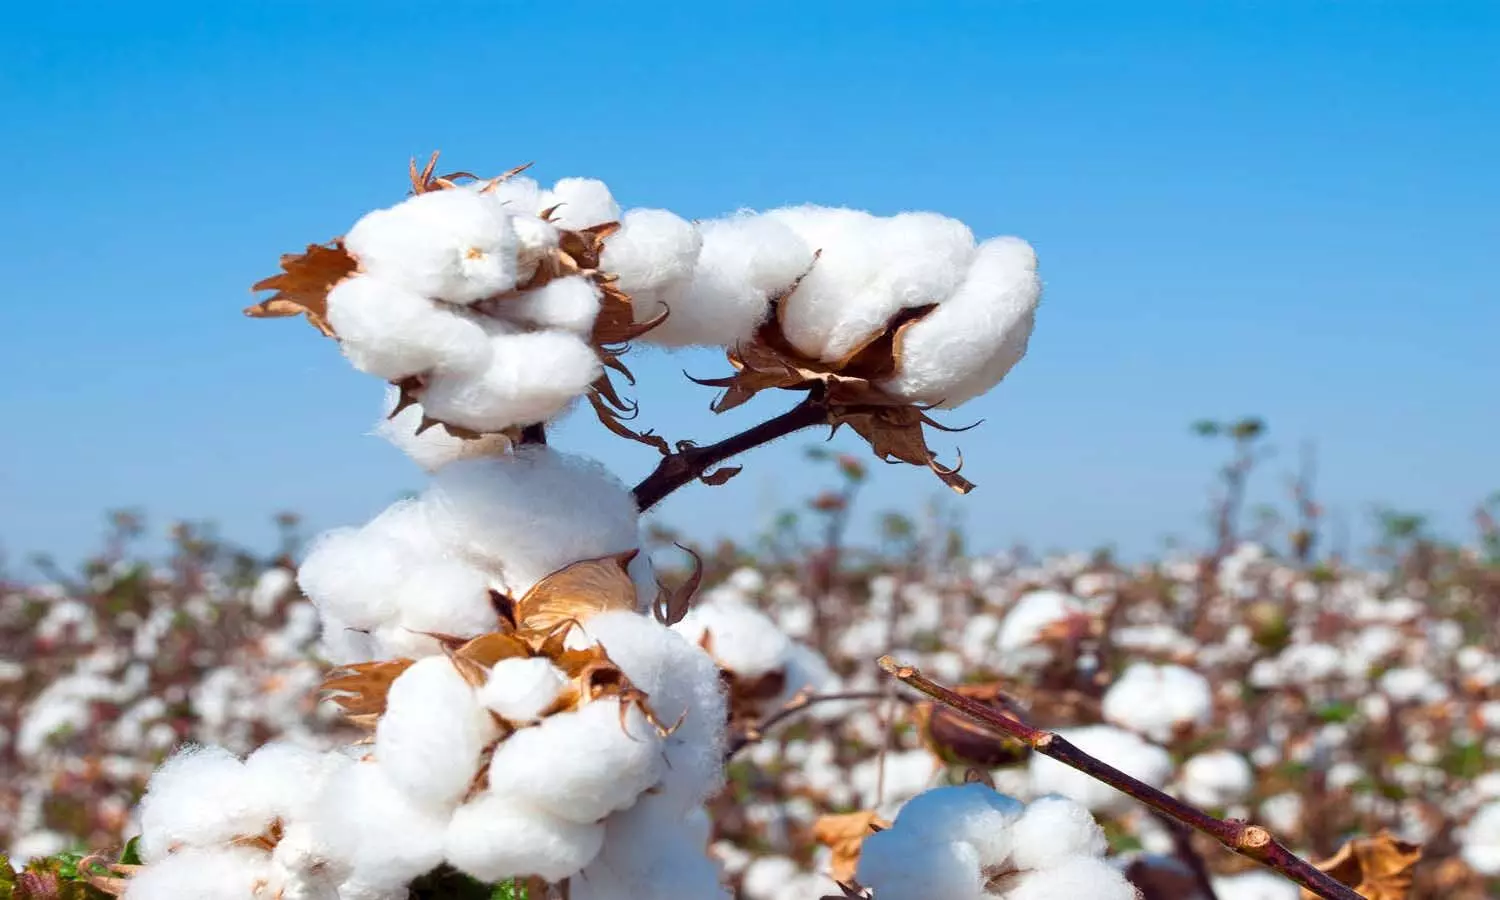 Cotton Prices Rise textile industries Demand for Ban on Exports